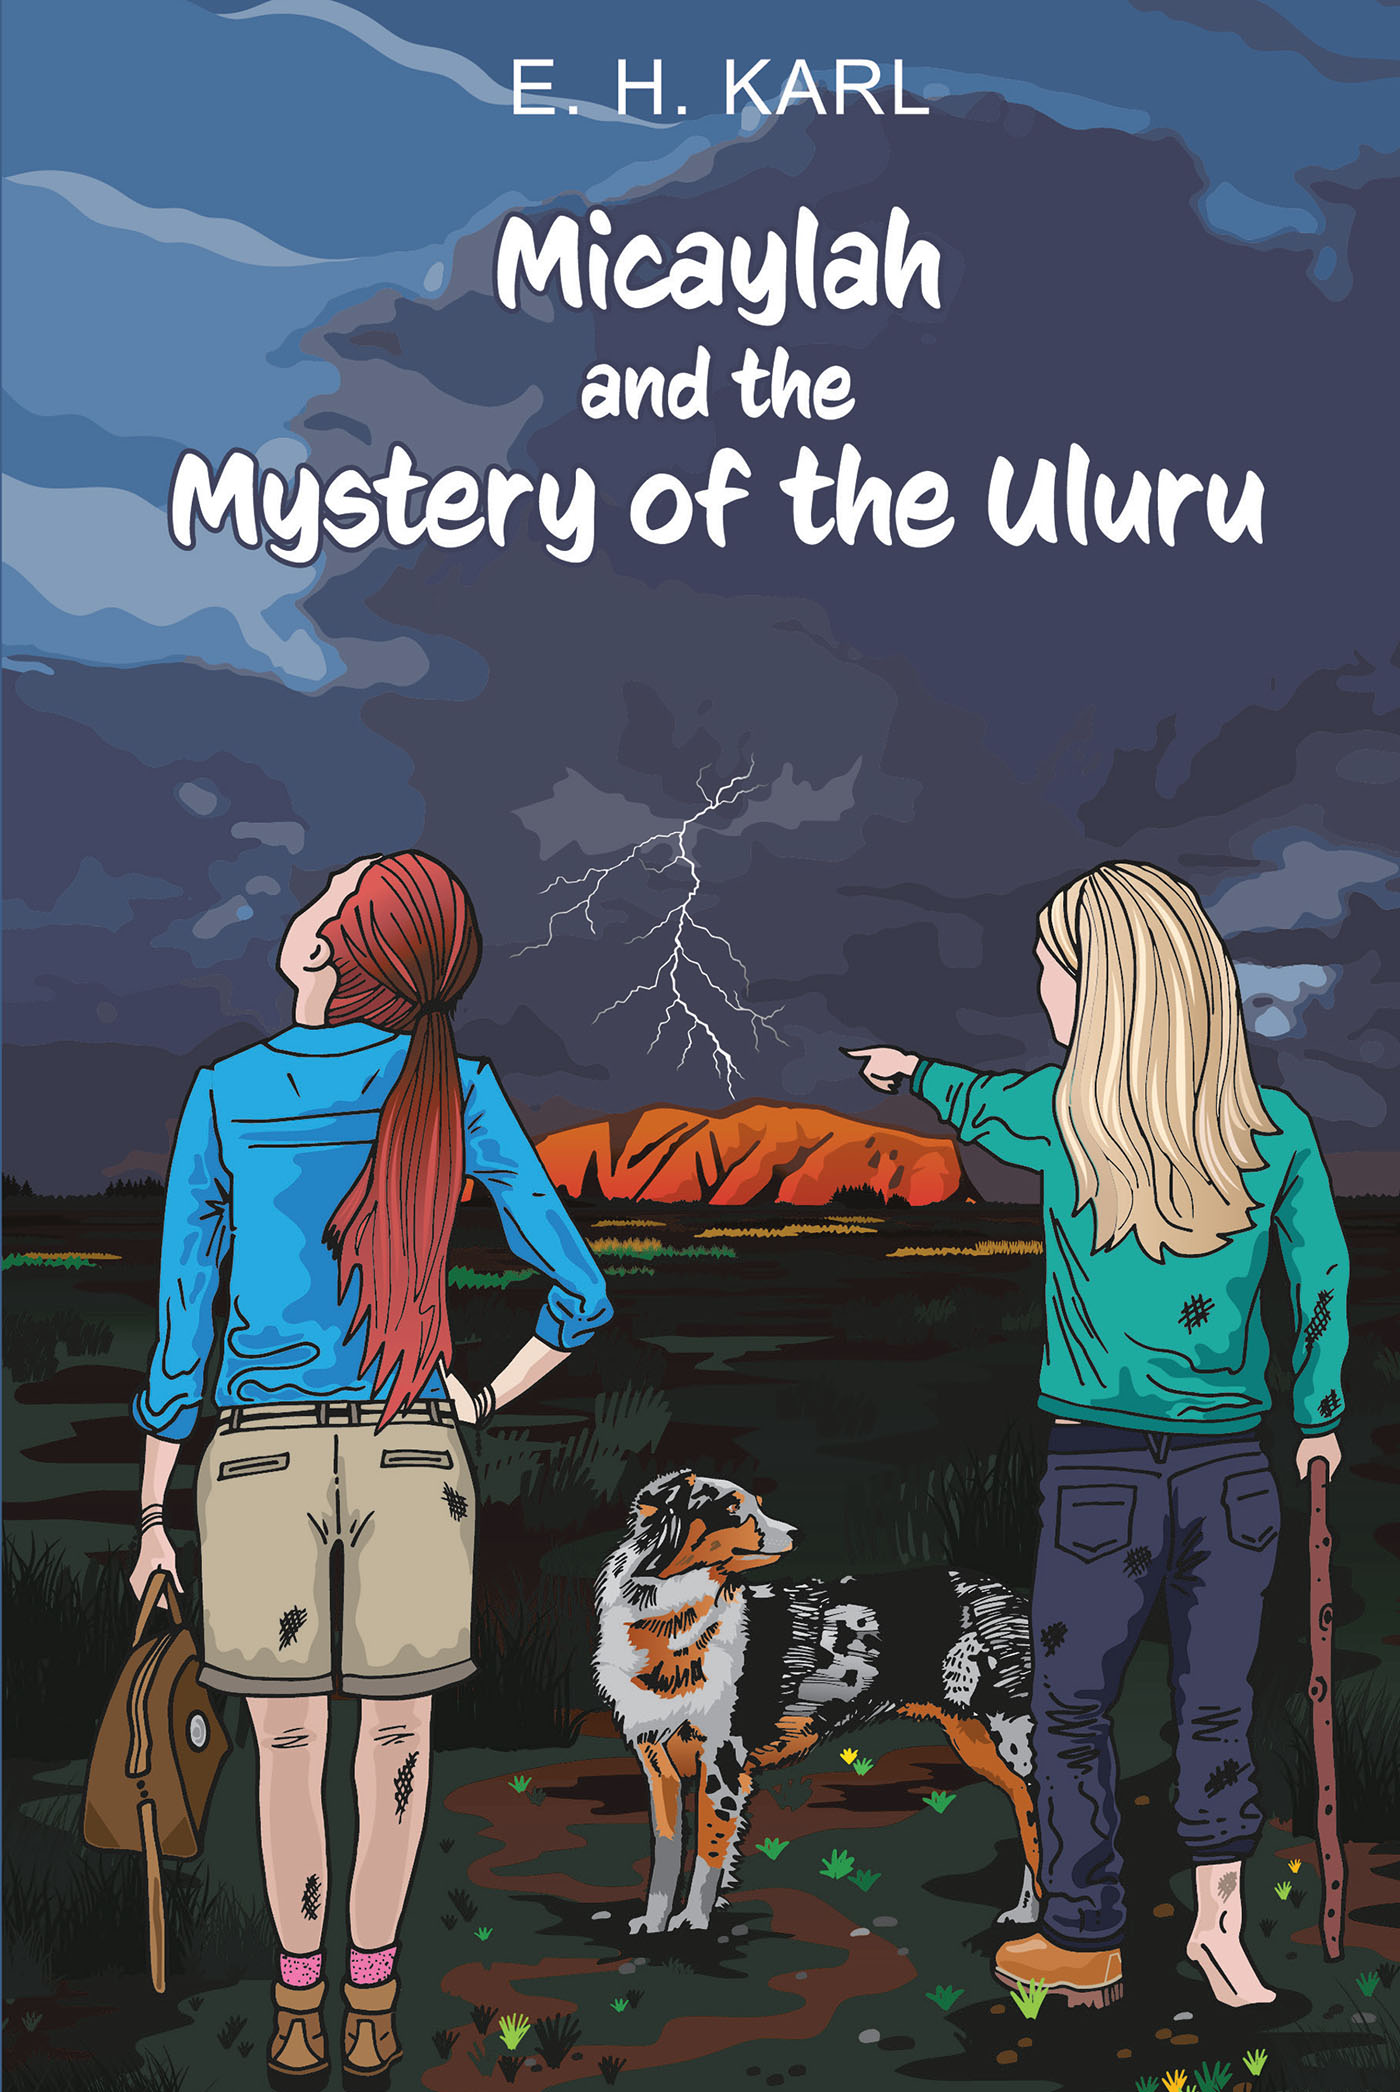 E. H. Karl’s Newly Released "Micaylah and the Mystery of the Uluru" is an Inspiring Journey Brimming with Unexpected Twists of Fate